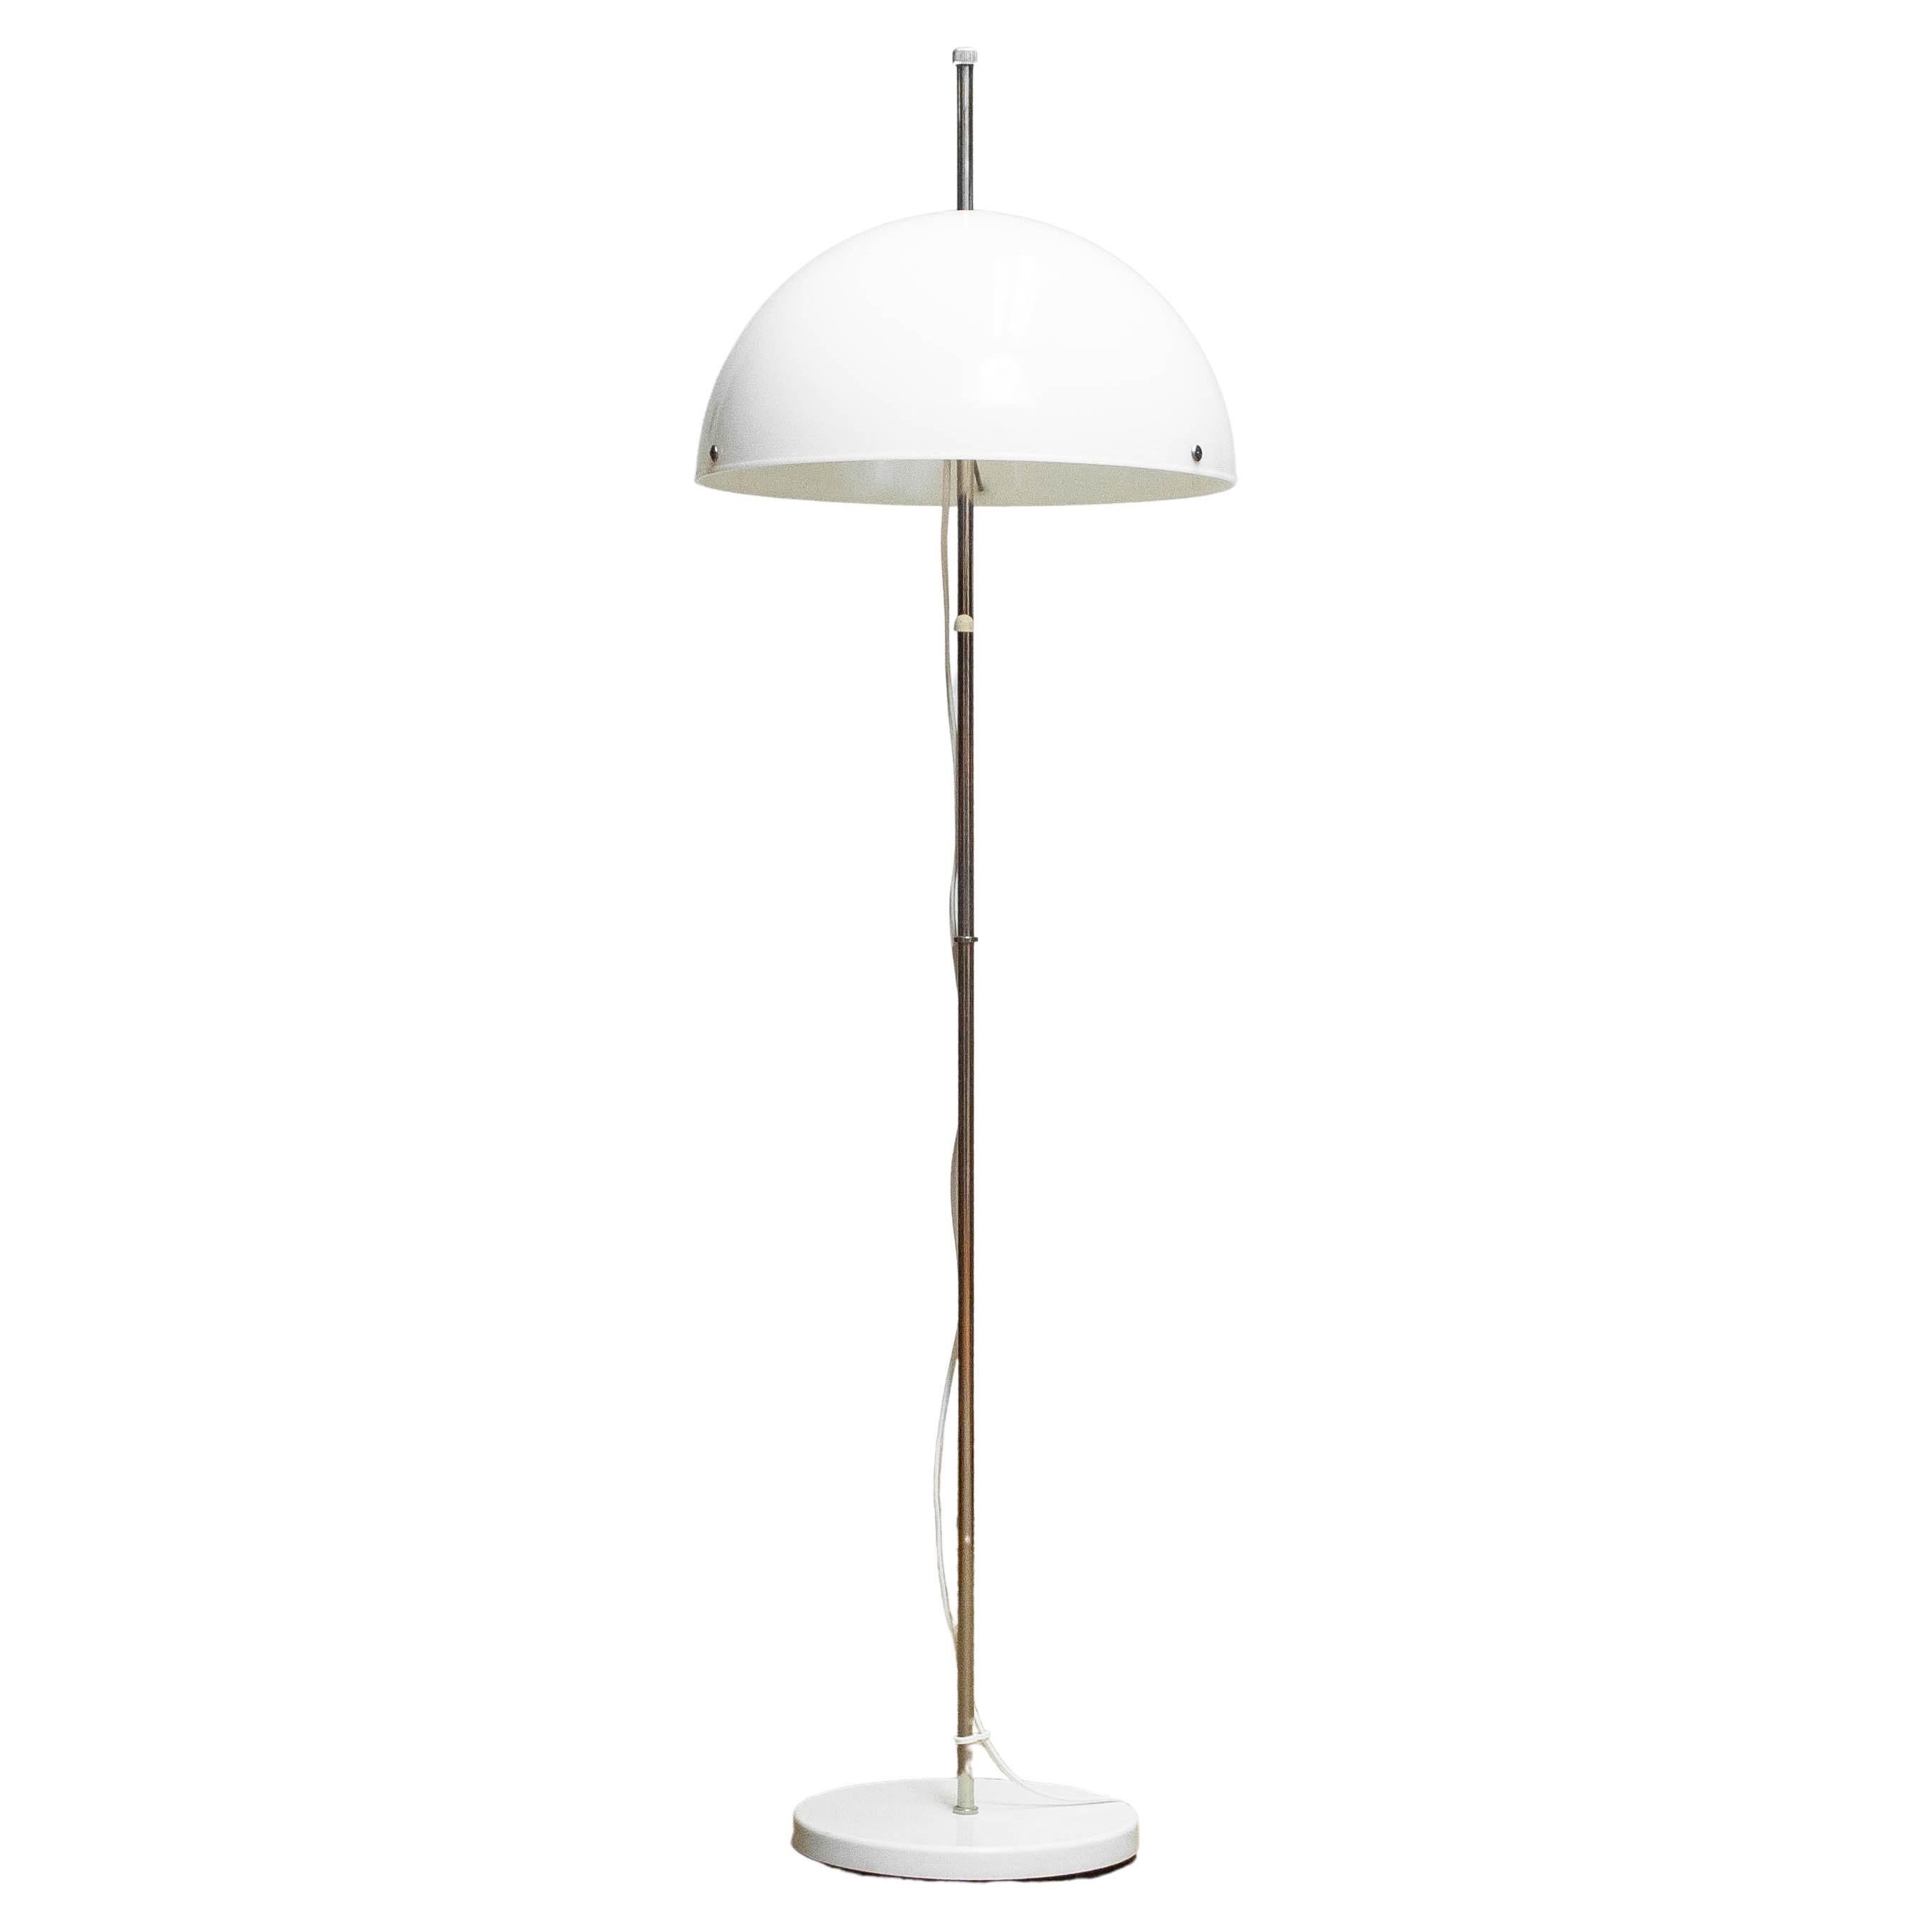 1970's Chrome and White Acrylic Mushroom Floor Lamp Made by Fagerhult Sweden For Sale